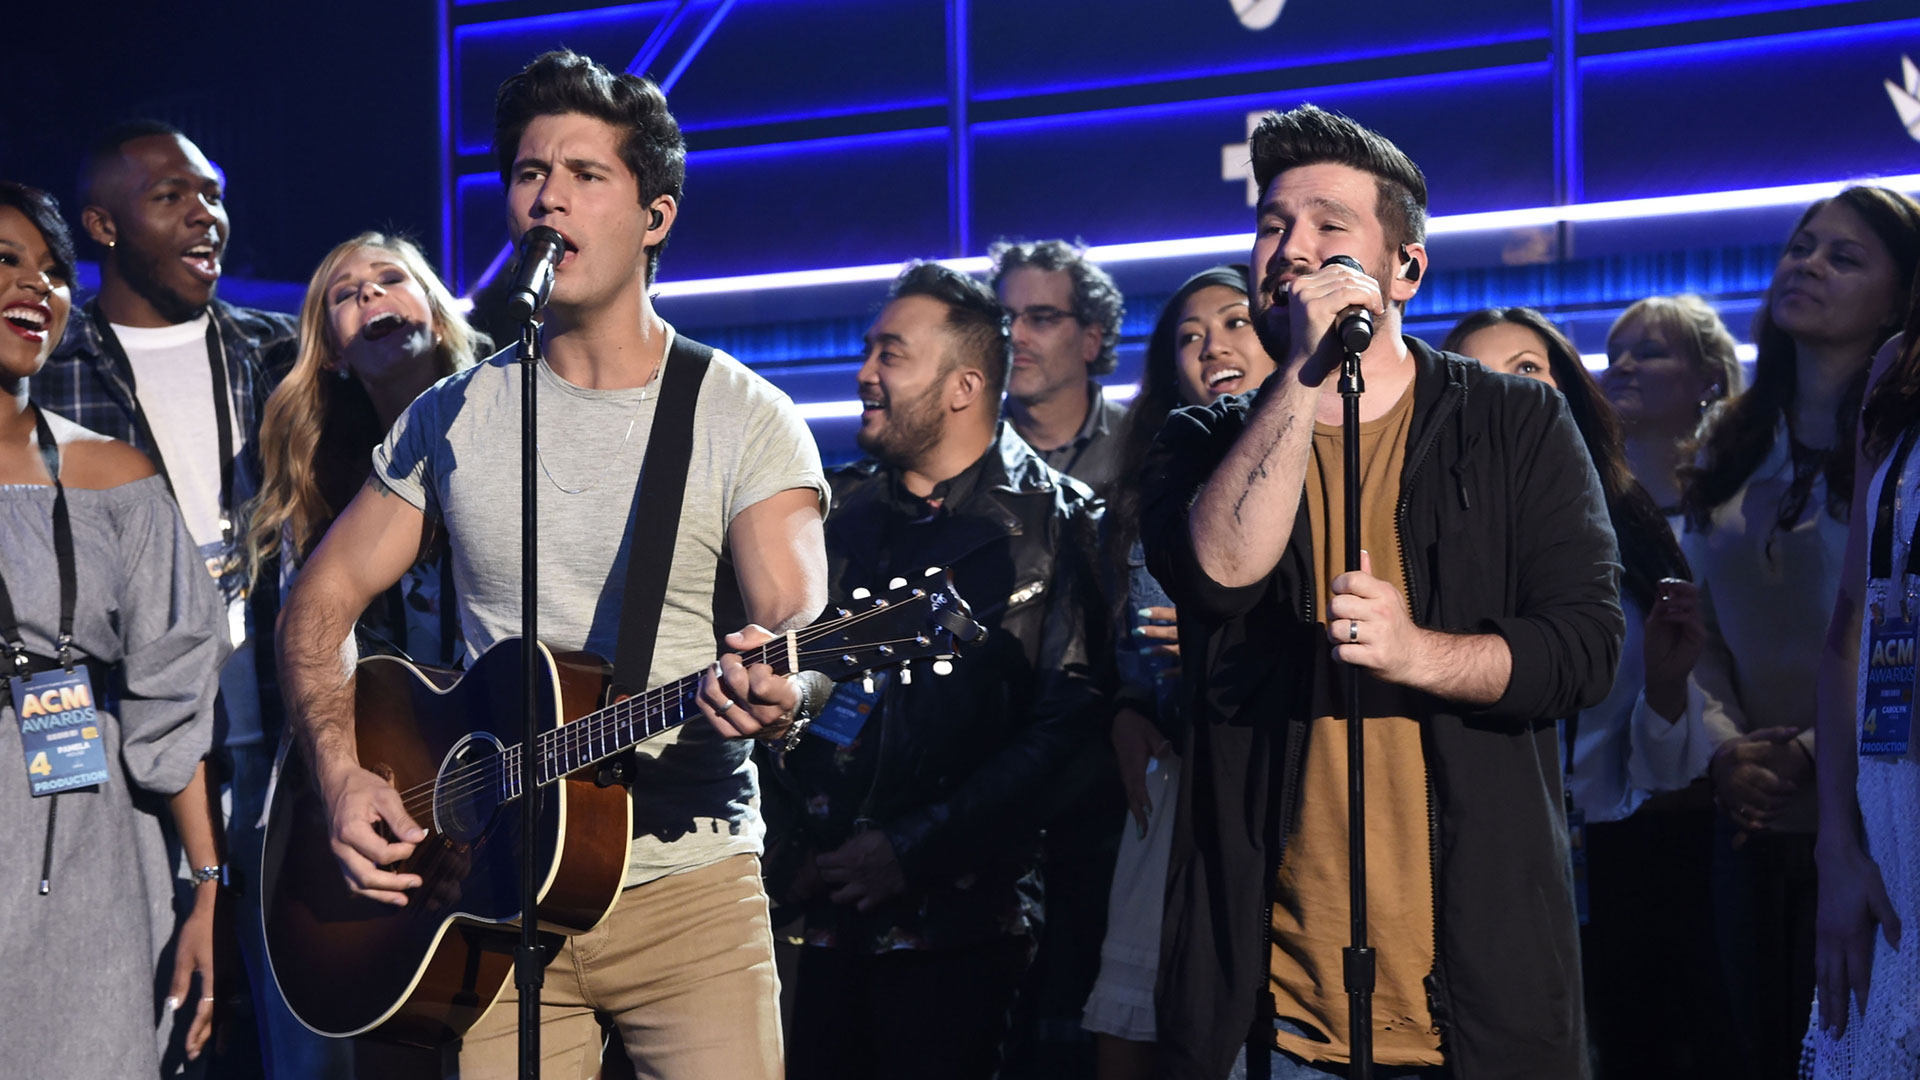 Dan + Shay are the life of the party during their rehearsal for Sunday night's big show!